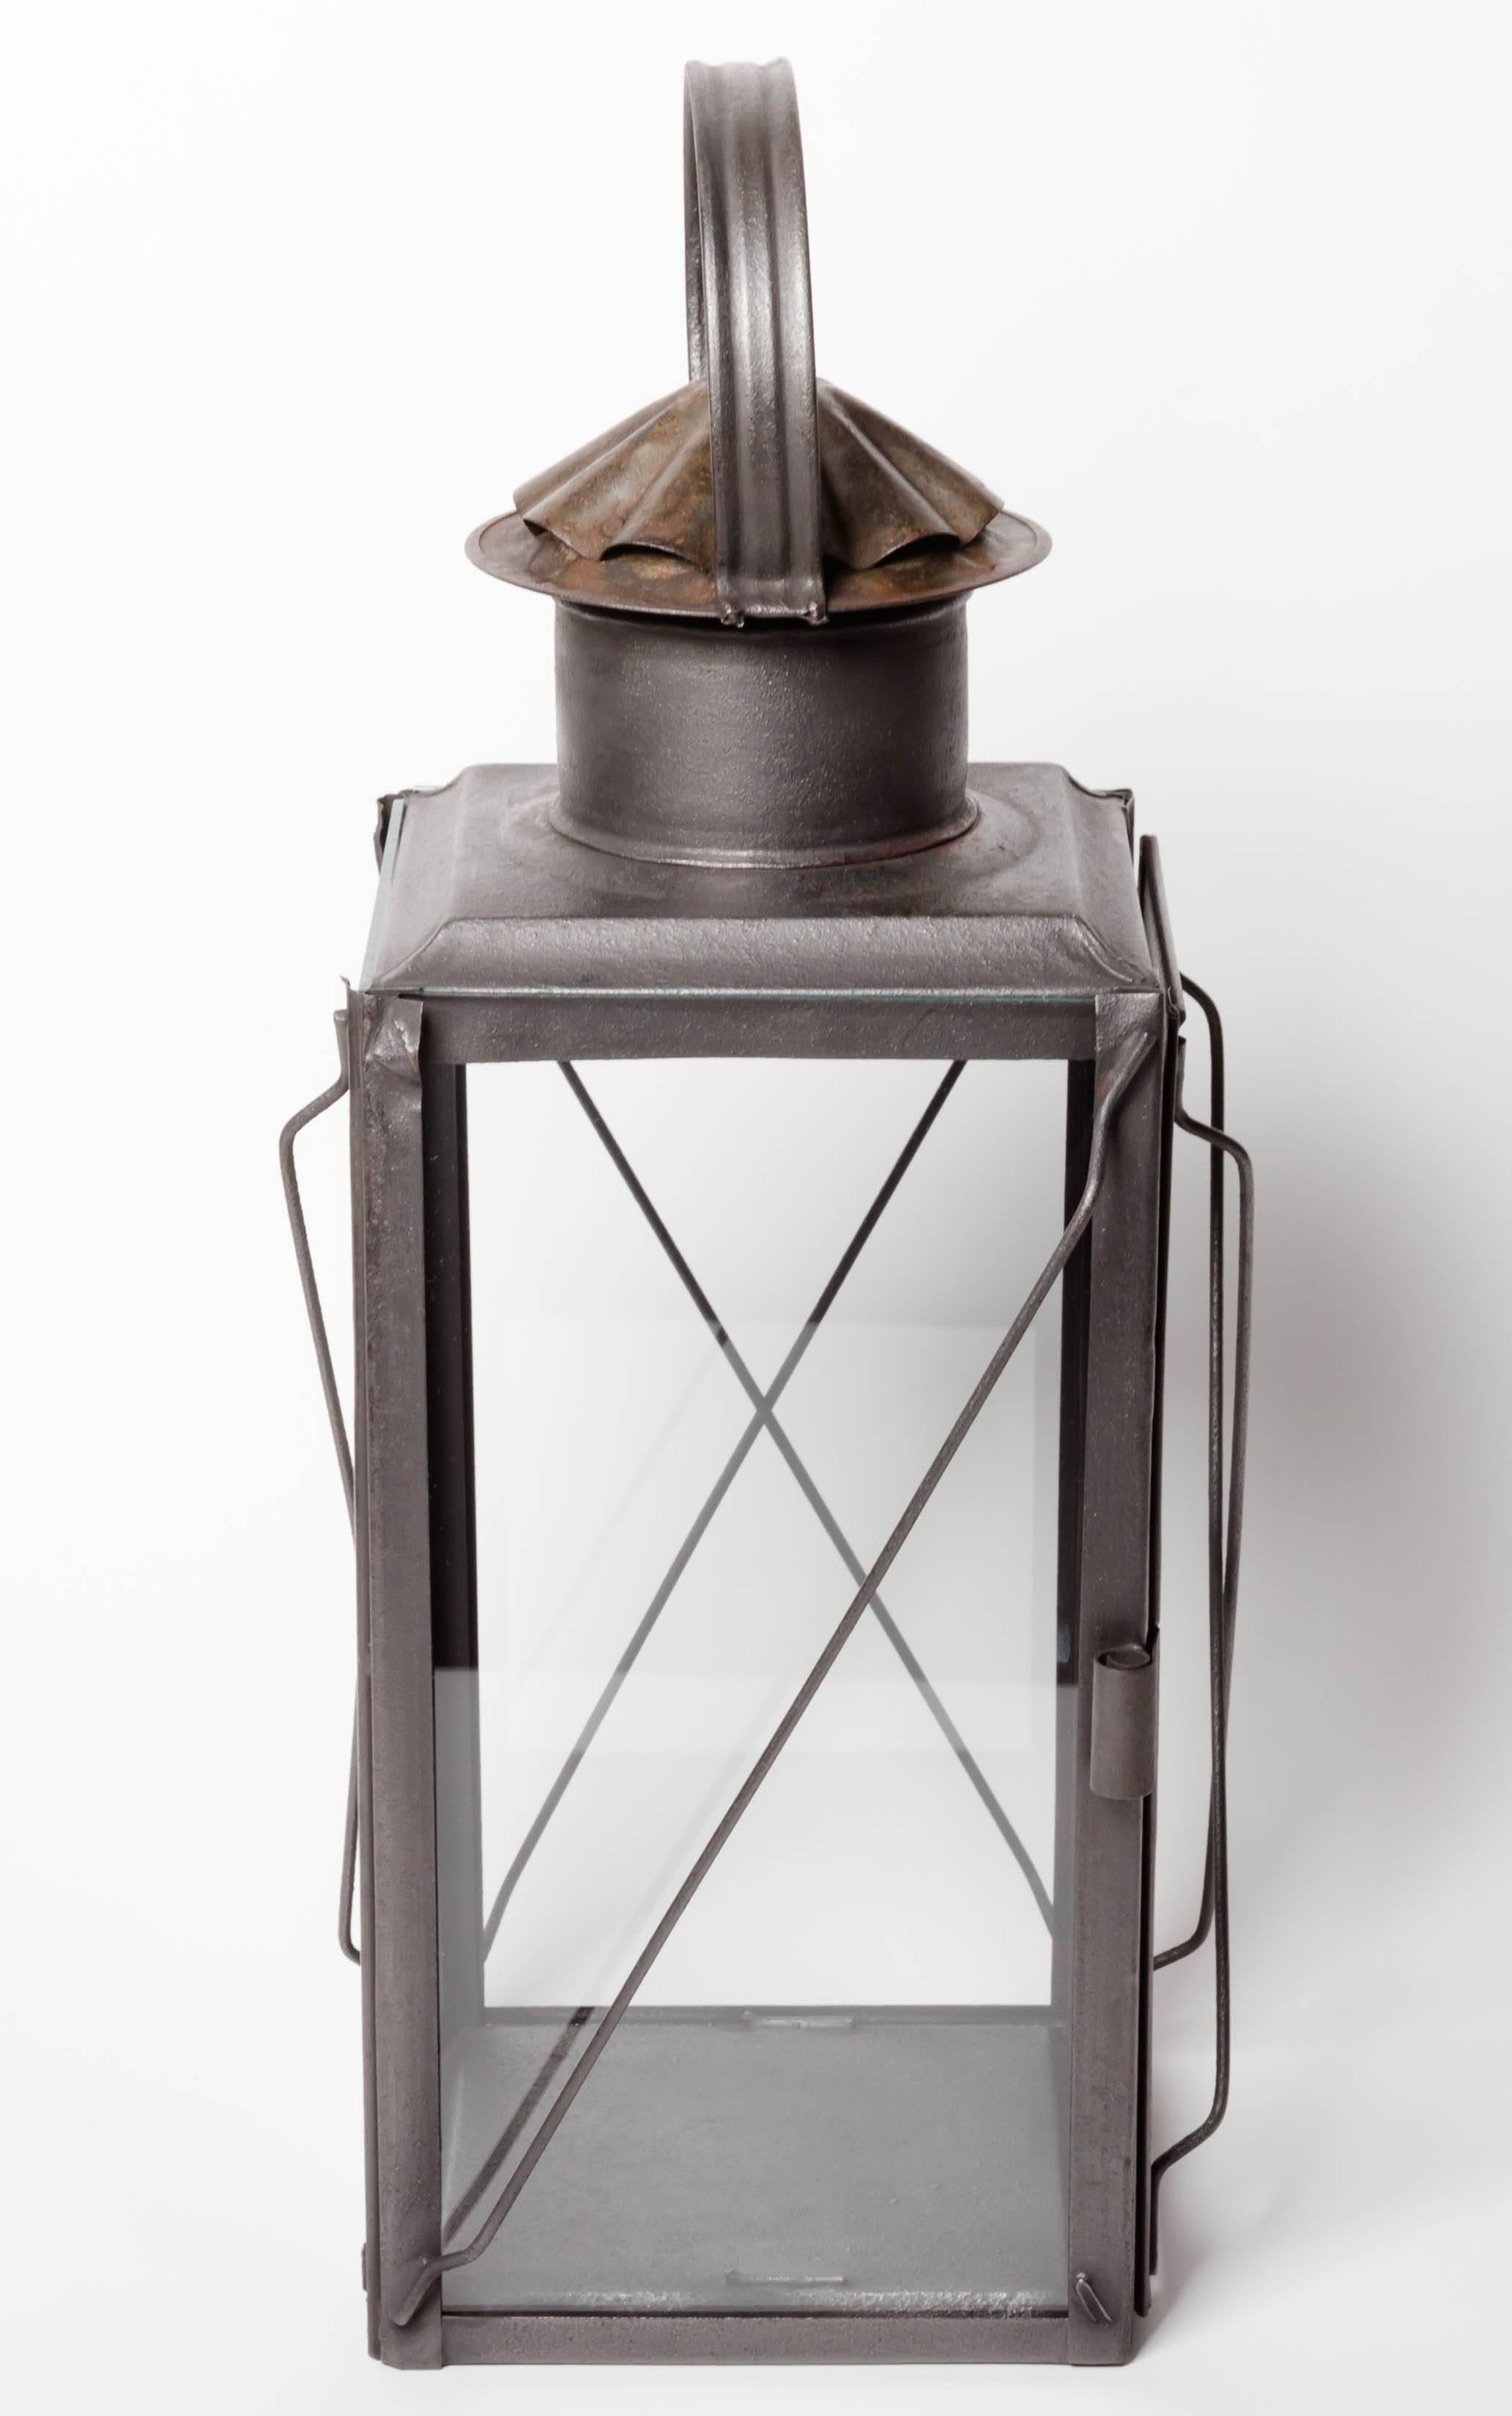 This beautifully simple 19th century Scottish glazed gunmetal finish steel lantern has a circular ribbed handle above ruffled vent cap. One side is a door with a spring coil door clasp. Steel rod X design guards are on the outside. The lantern was